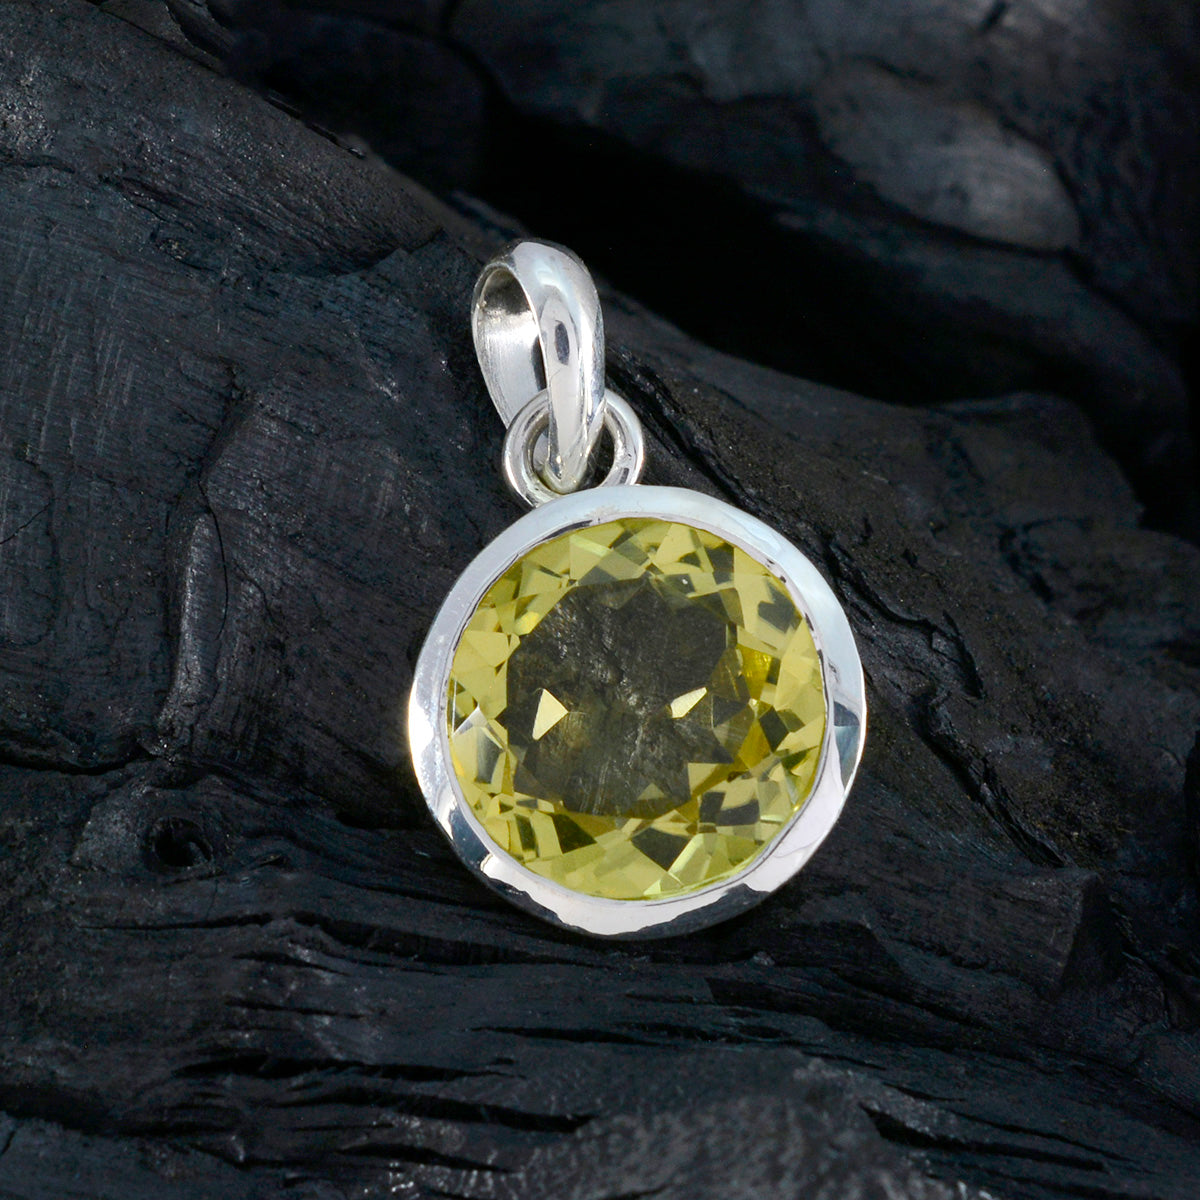 Riyo Magnificent Gemstone Round Faceted Yellow Citrine 979 Sterling Silver Pendant Gift For Teachers Day